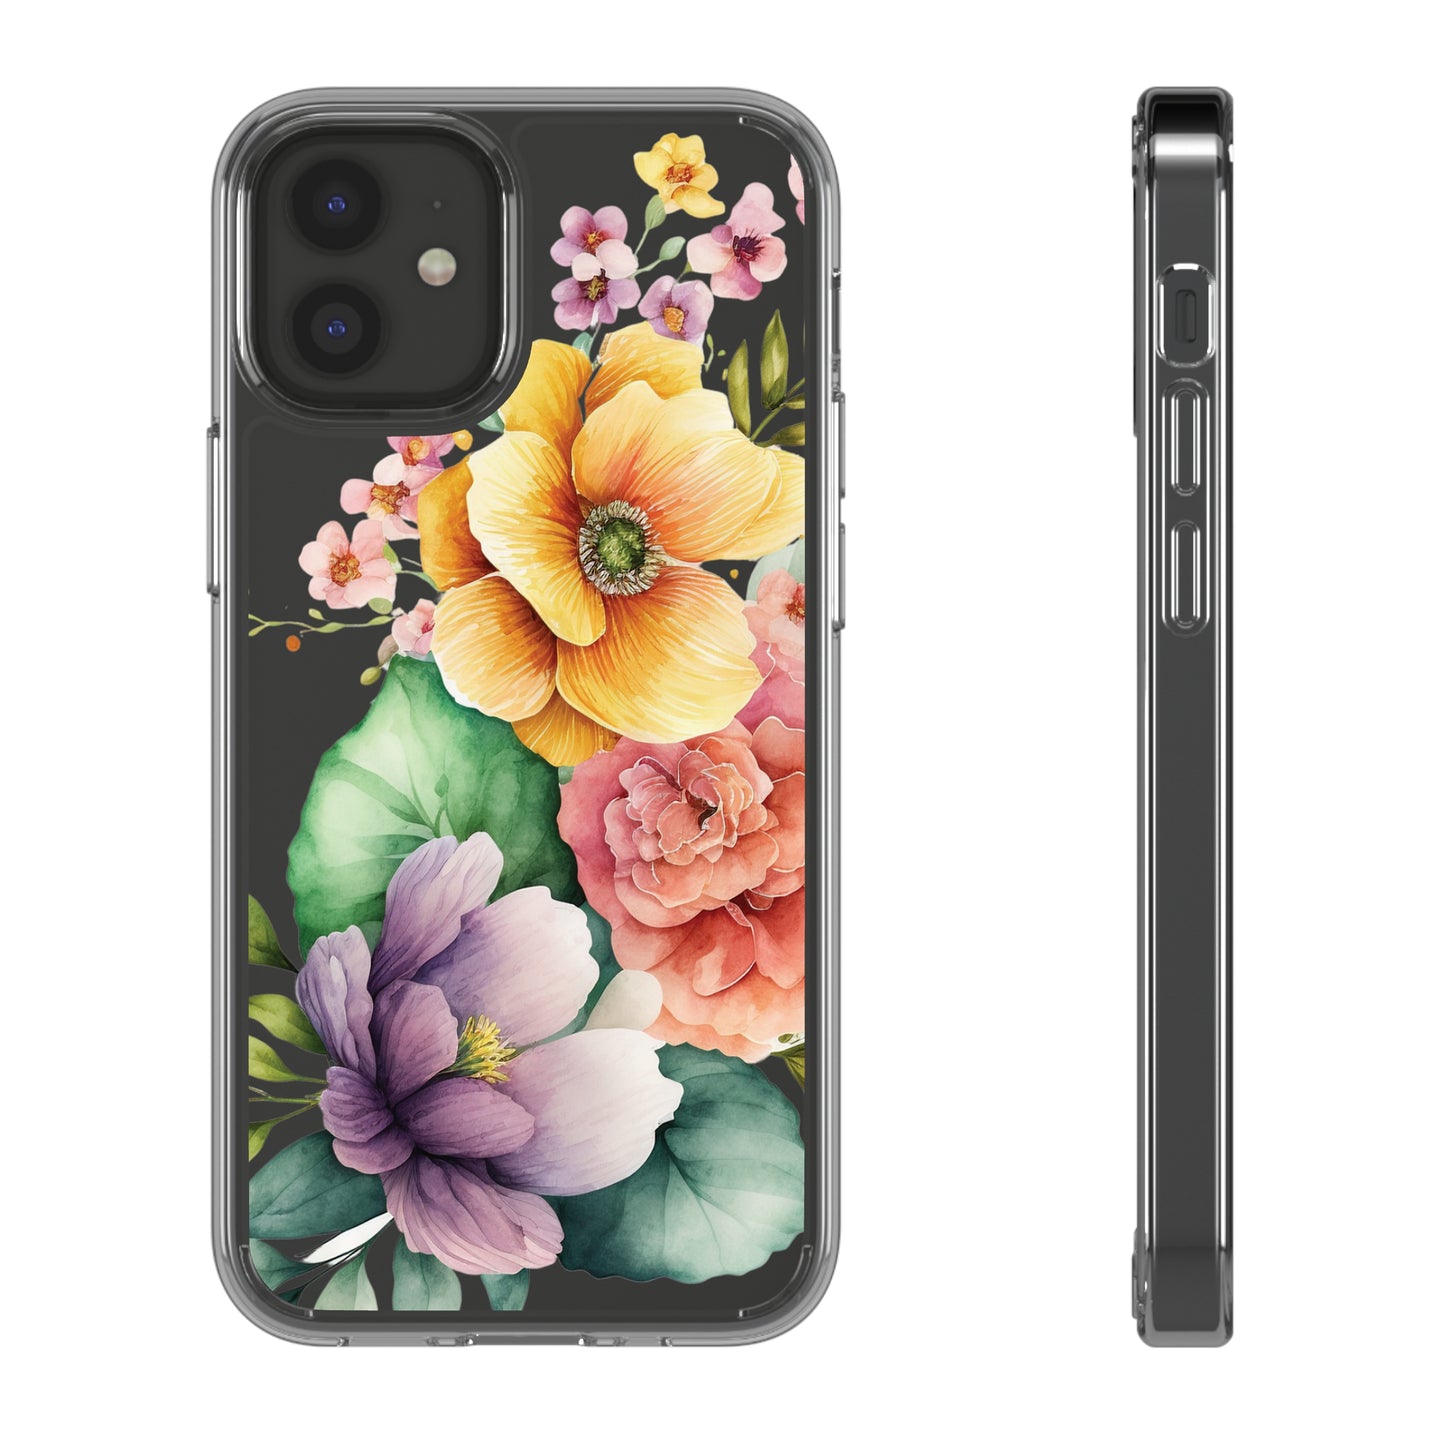 Phone Clear Cases: Watercolor Floral Pattern